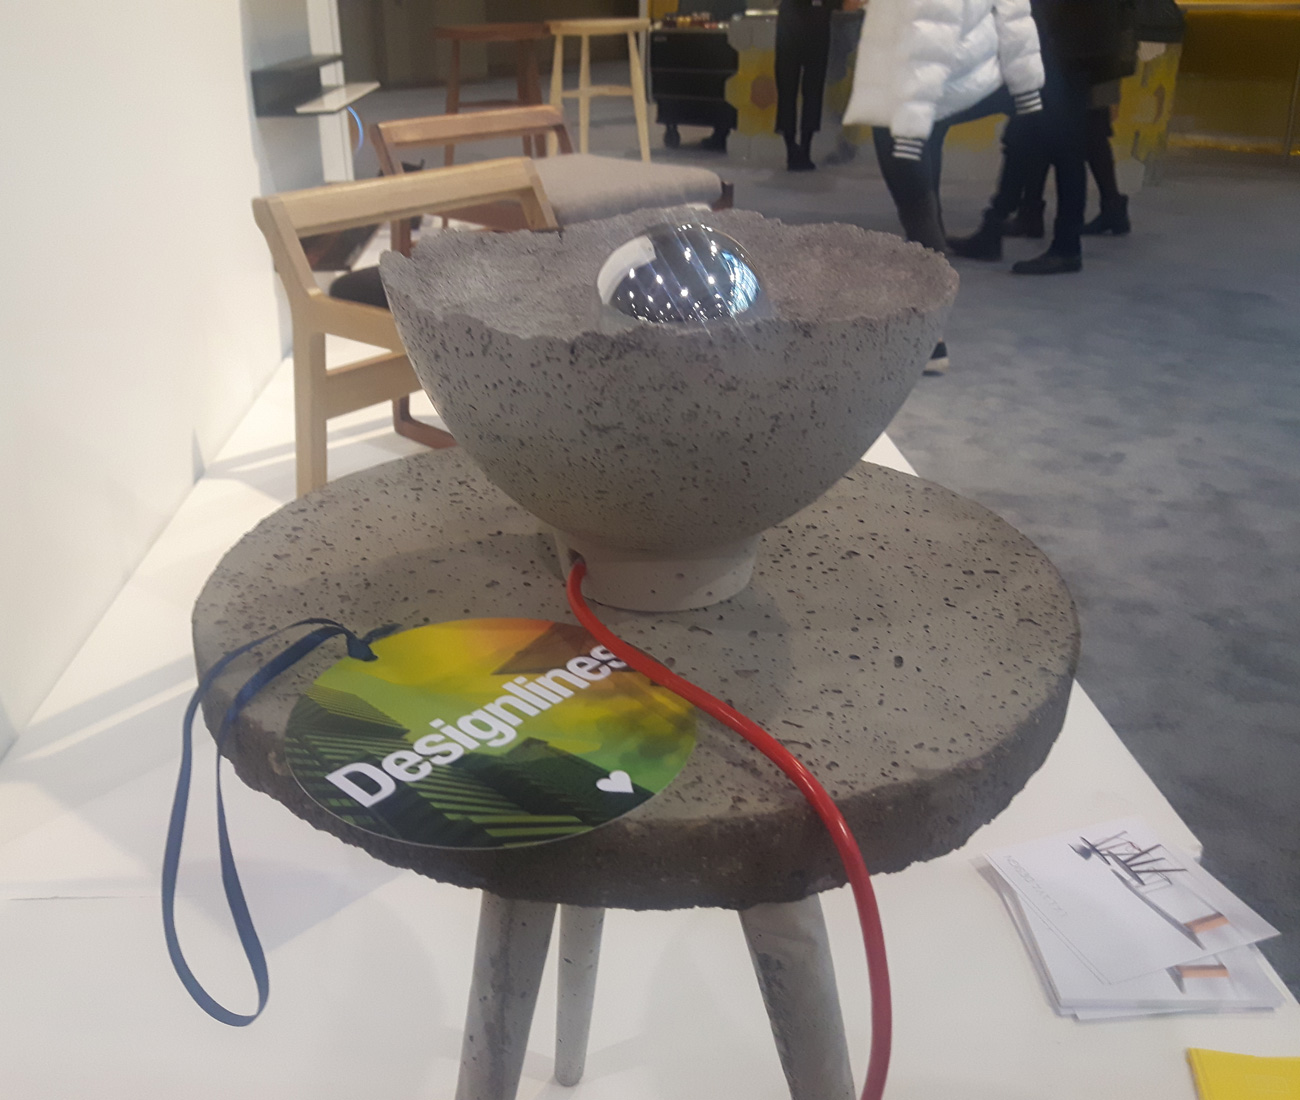 Seen at this year’s Prototype competition, the Ka Tsi Ka Ta and Ta Ka Tis Ka side tables and Ayê lamp are the work of local designer Hanae Baruchel. Sidelined from her former career by a brain injury in 2016, Baruchel began making and manipulating materials as a form of recovery and therapy. Particularly drawn to concrete, she transforms the industrial mainstay into near wafer-thin lamps and cute, three-legged side tables, among other pieces for her recently founded studio Lalaya Design.